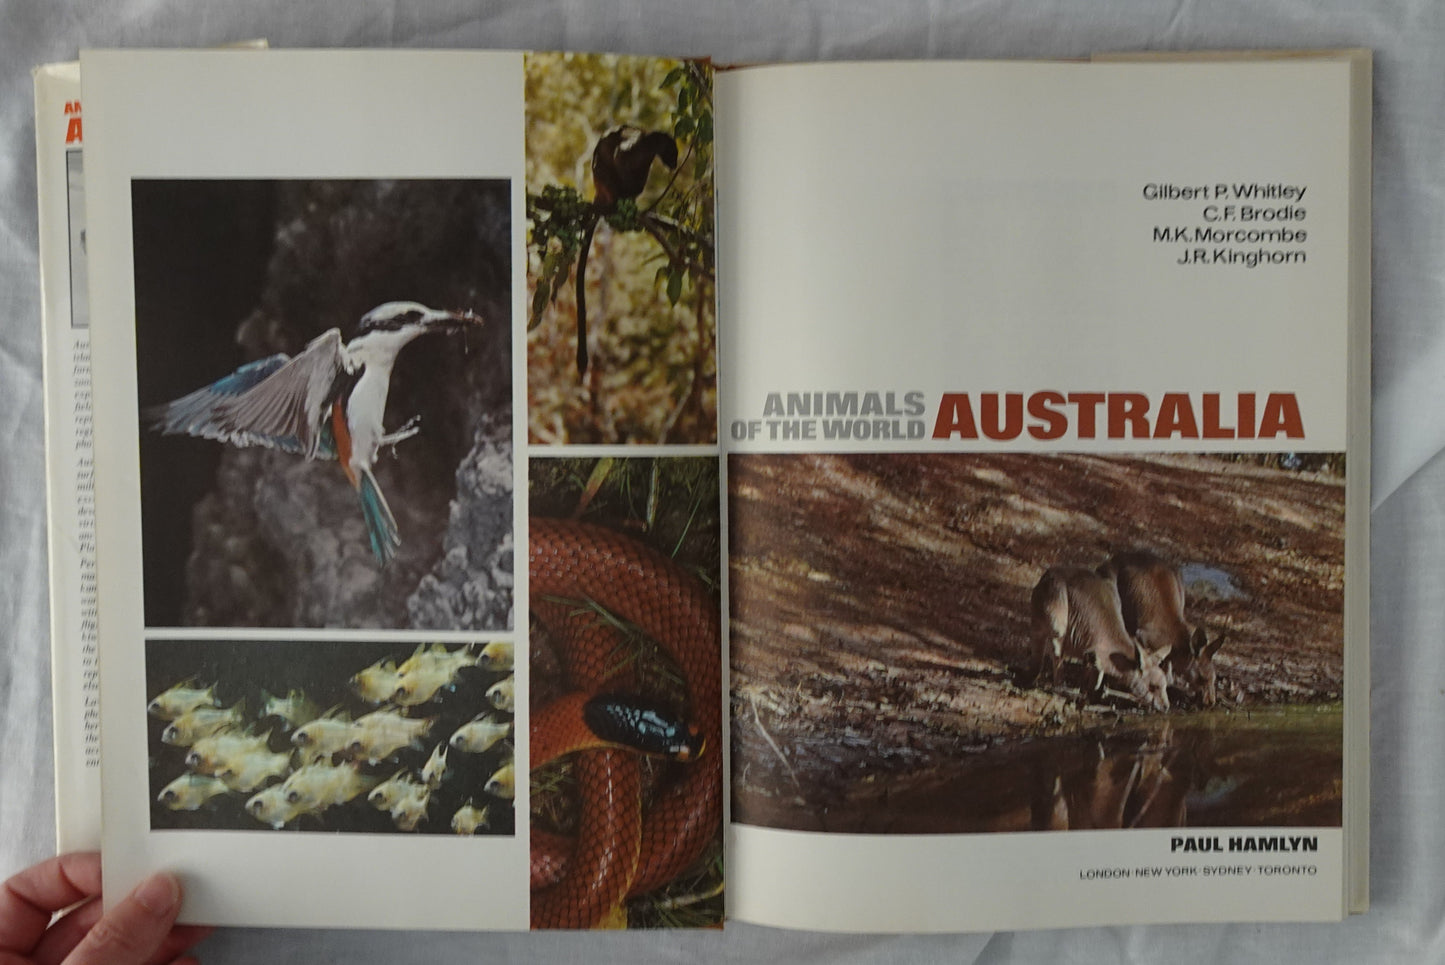 Animals of the World Australia by Gilbert P. Whitley, C. F. Brodie, M. K. Morcombe and J. R. Kinghorn